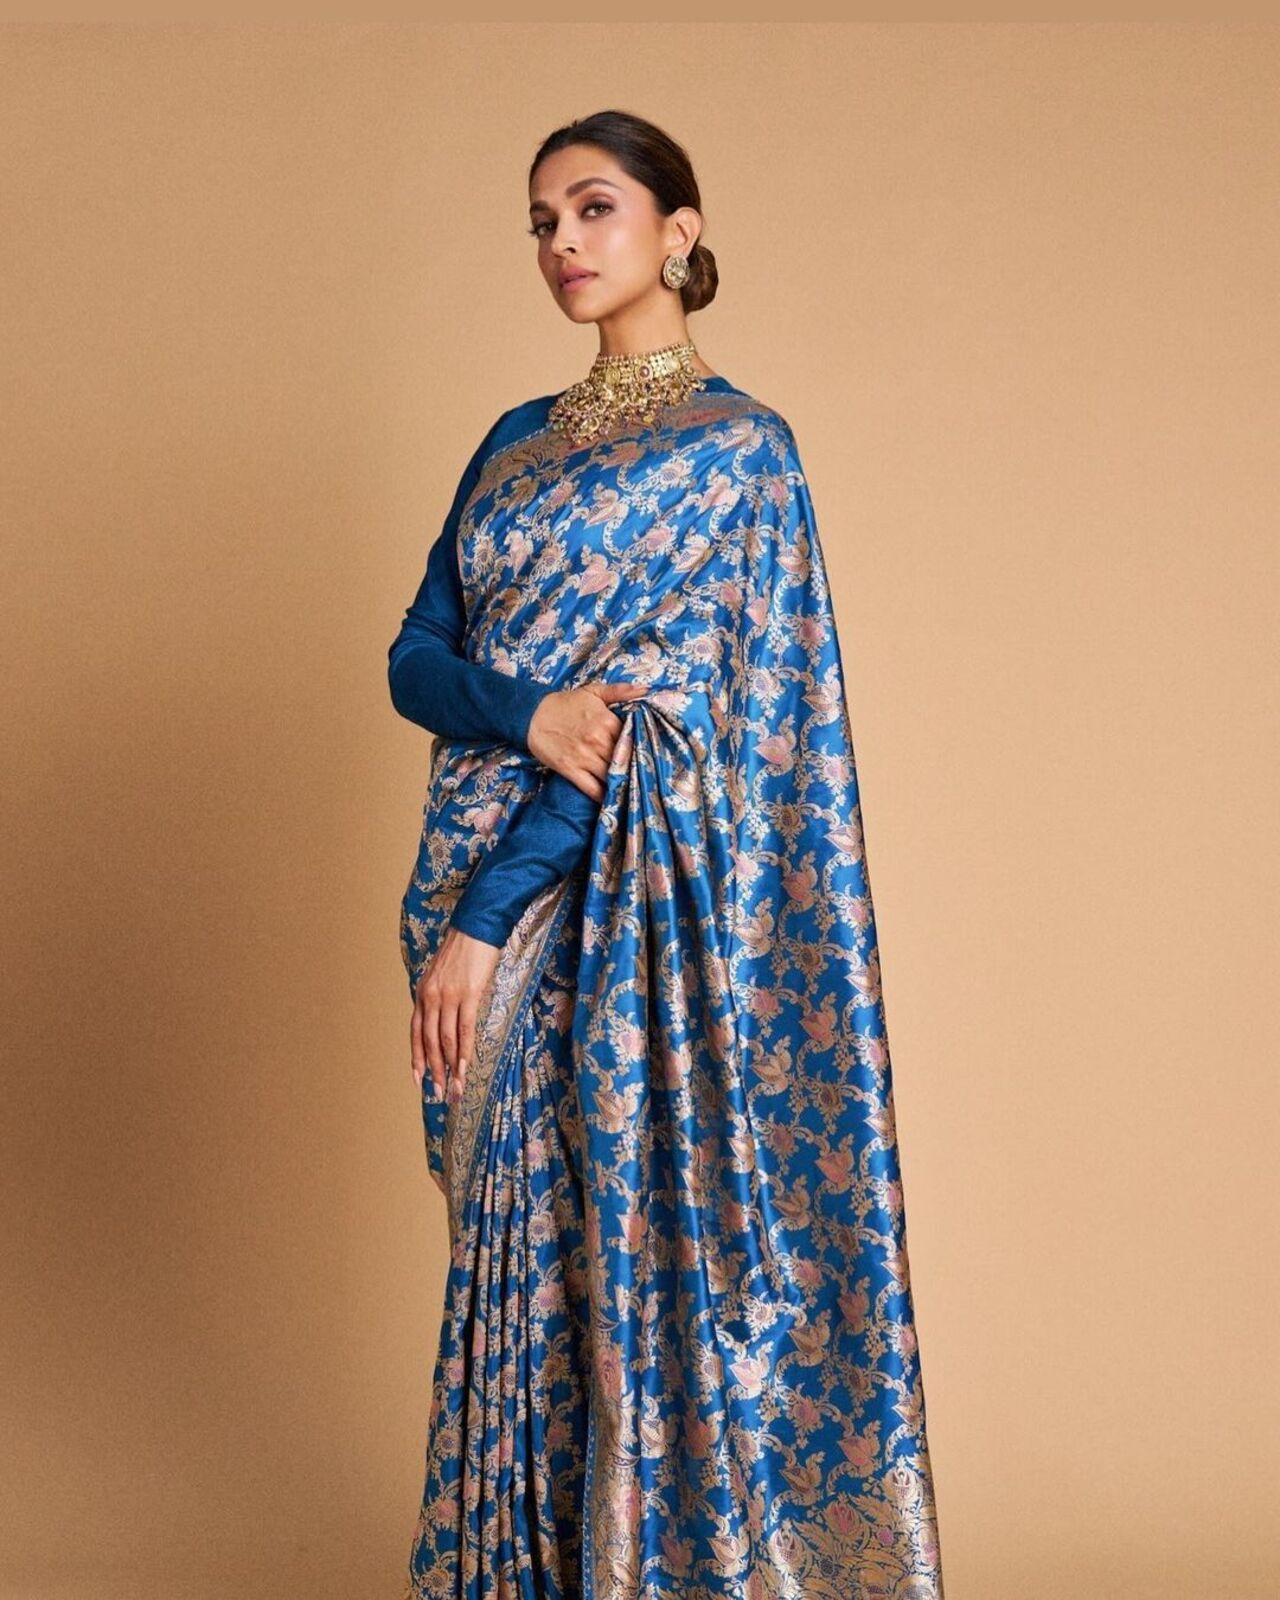 Sabyasachi handpicked this stunning peacock blue Benarasi saree for the queen as she stepped out in the city for a function honouring the Mumbai police